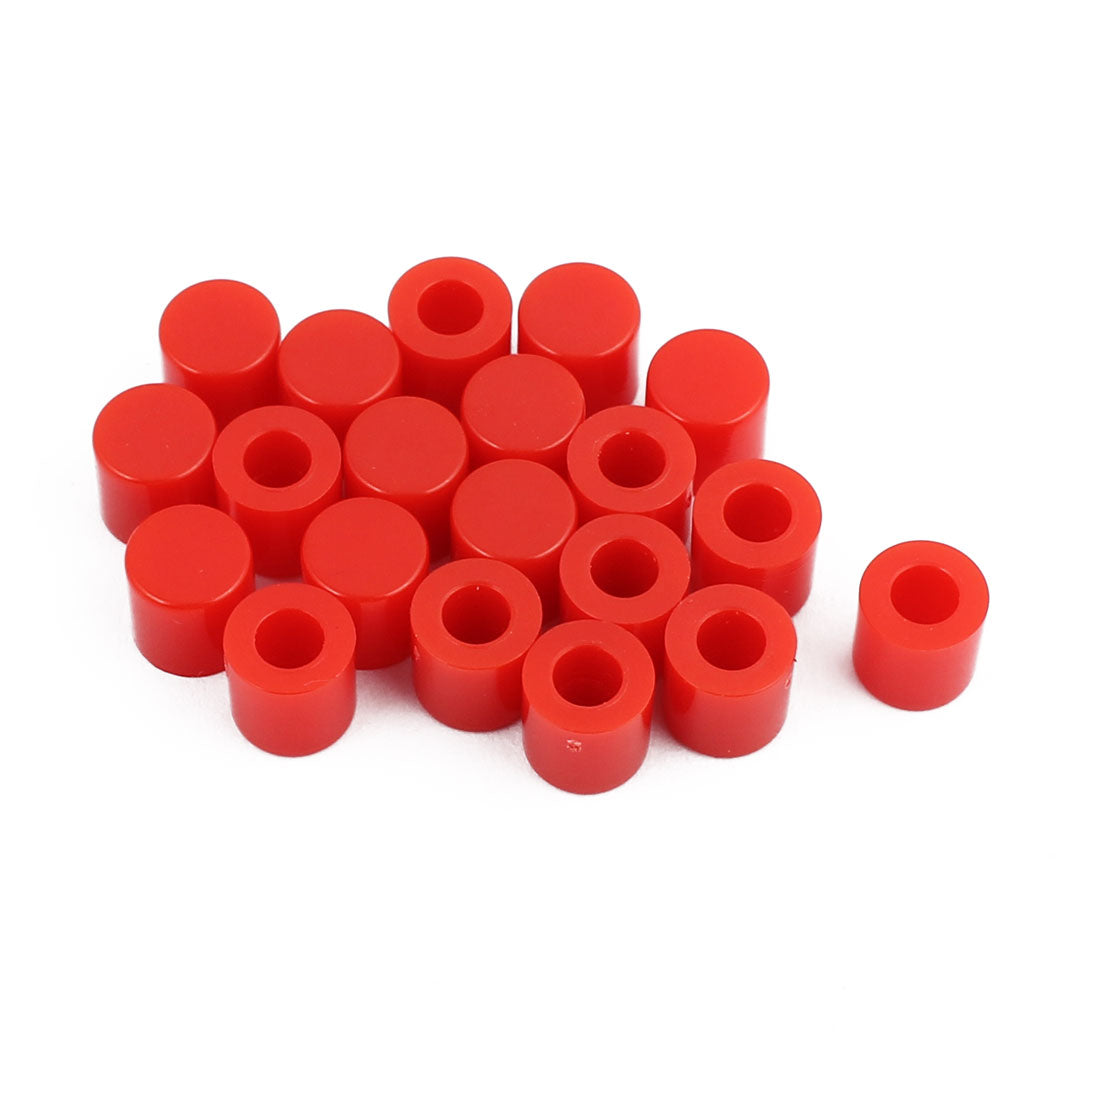 uxcell Uxcell 20Pcs Round Shaped Tactile Button Caps Covers Protector Red for 6x6mm Tact Switch